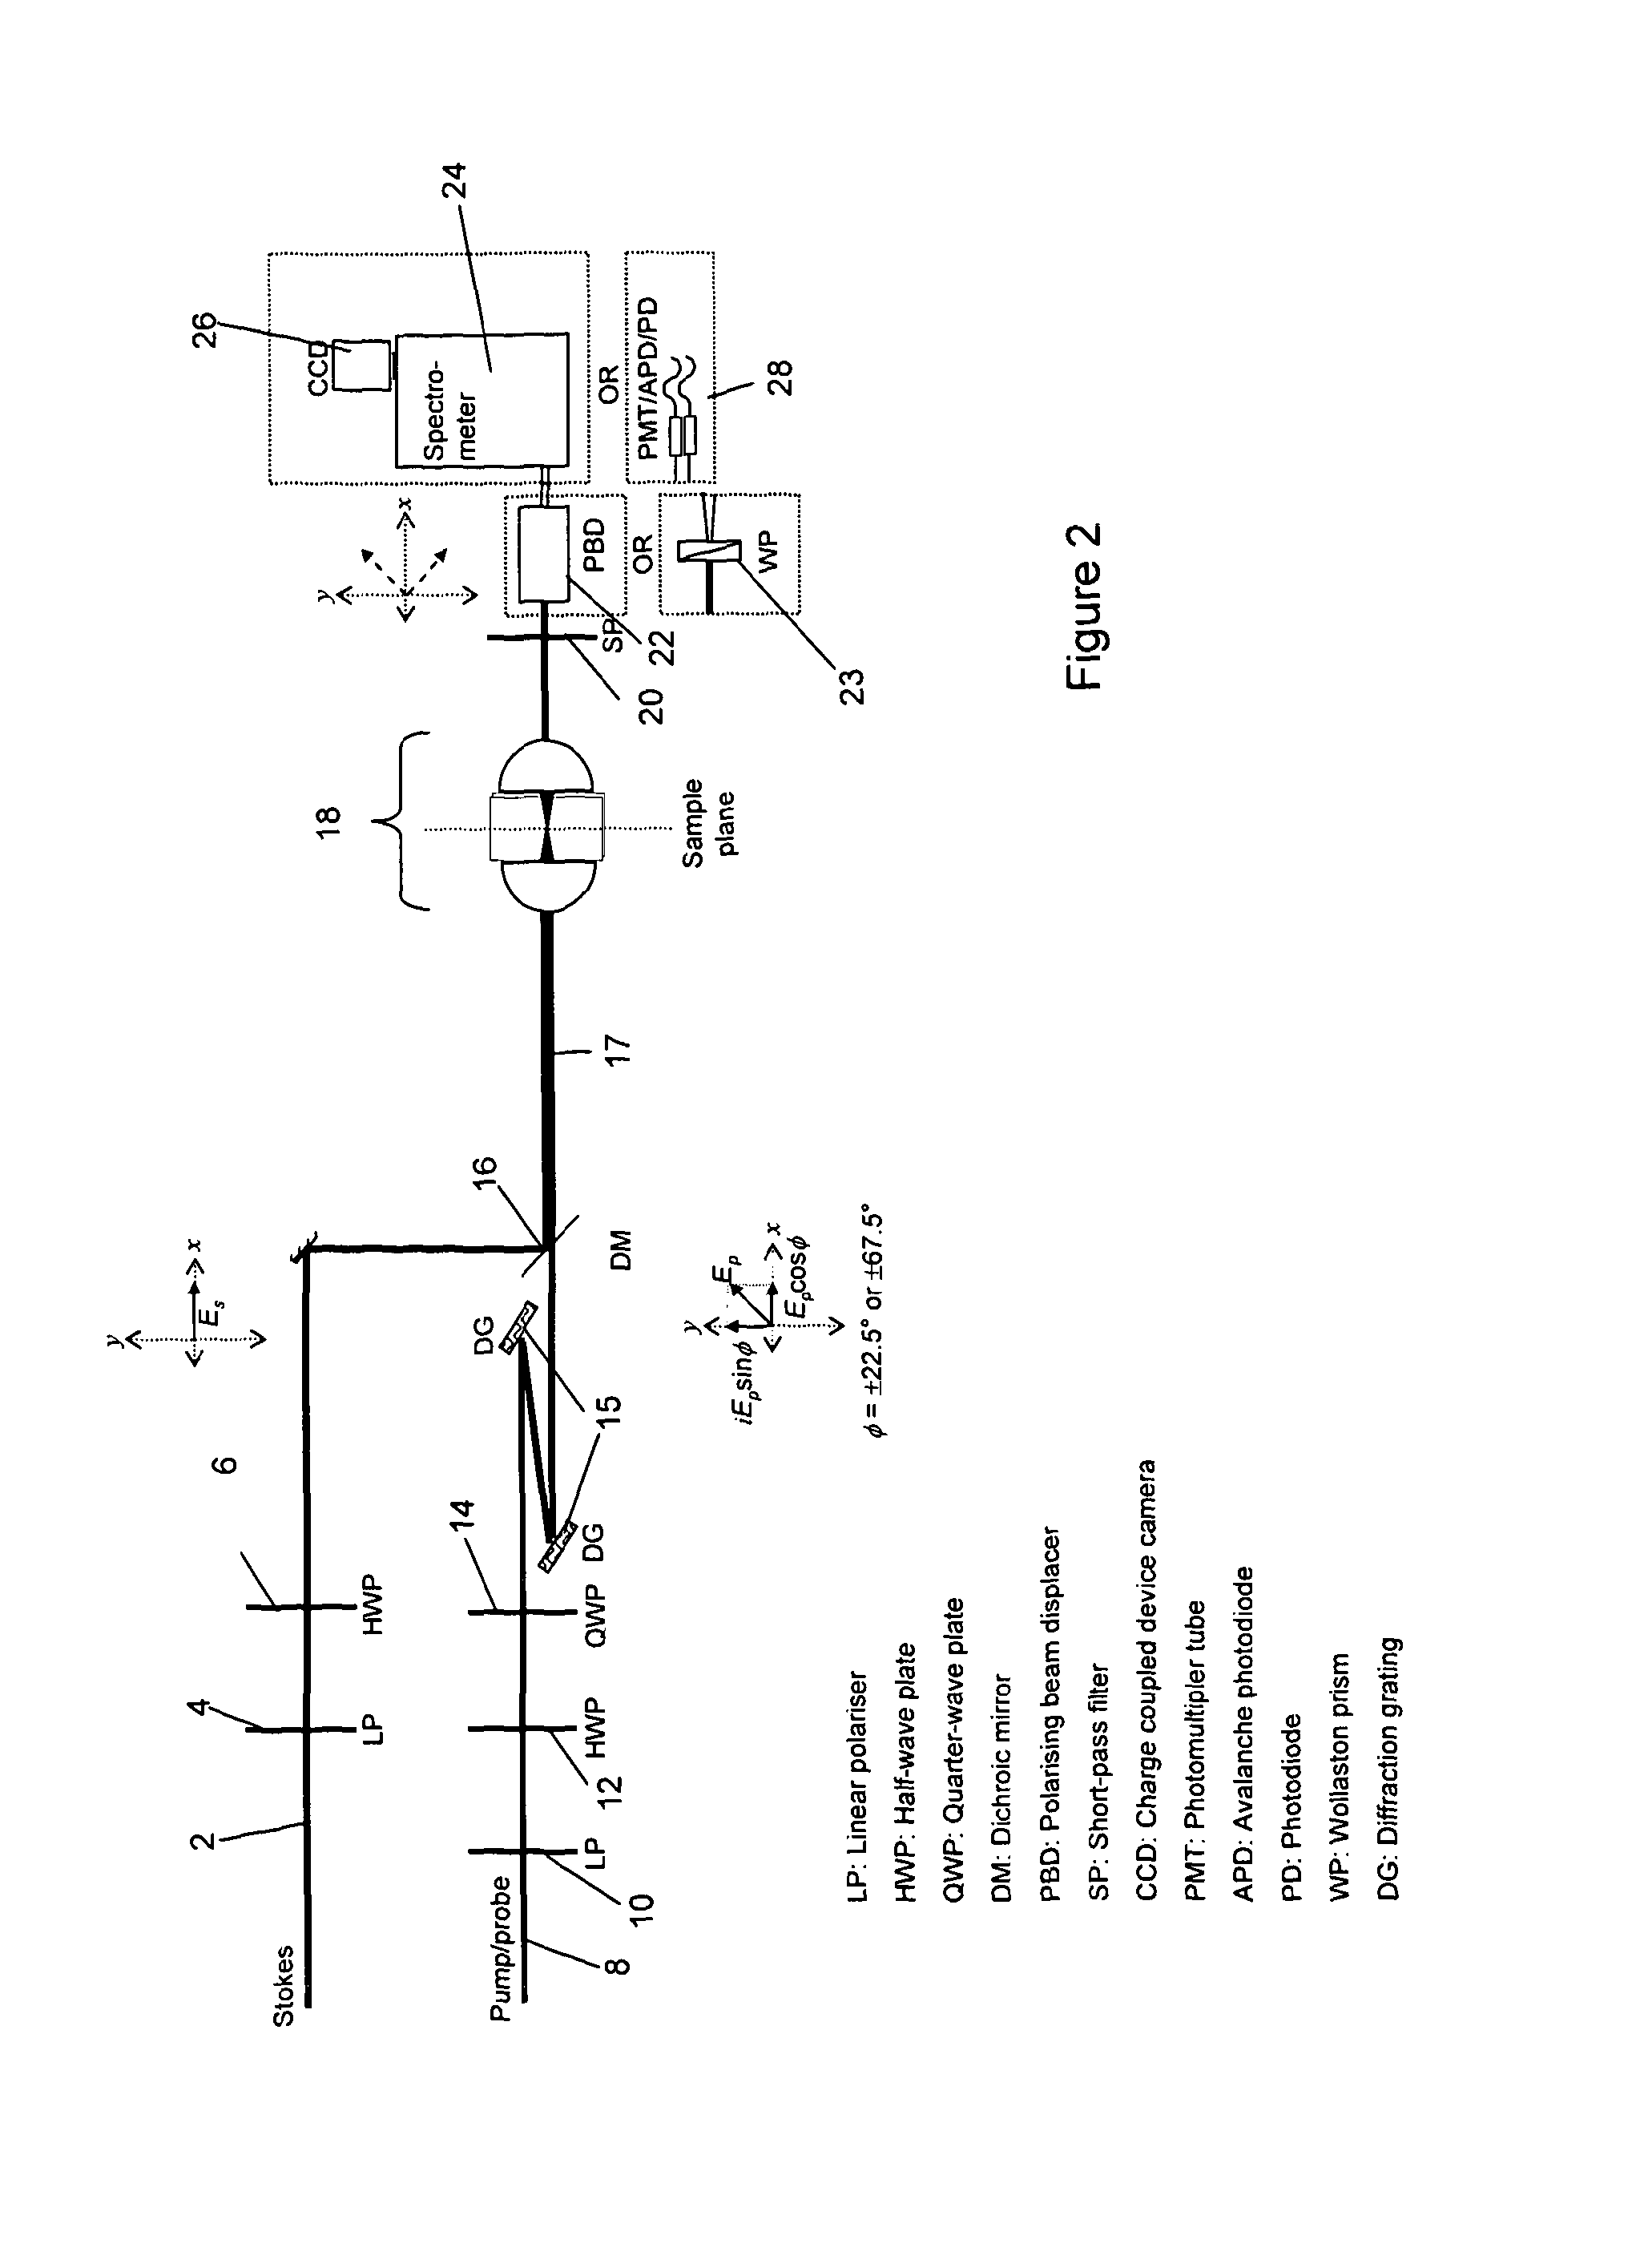 Method and apparatus for non-resonant background reduction in coherent Anti-stokes raman scattering (CARS) spectroscopy